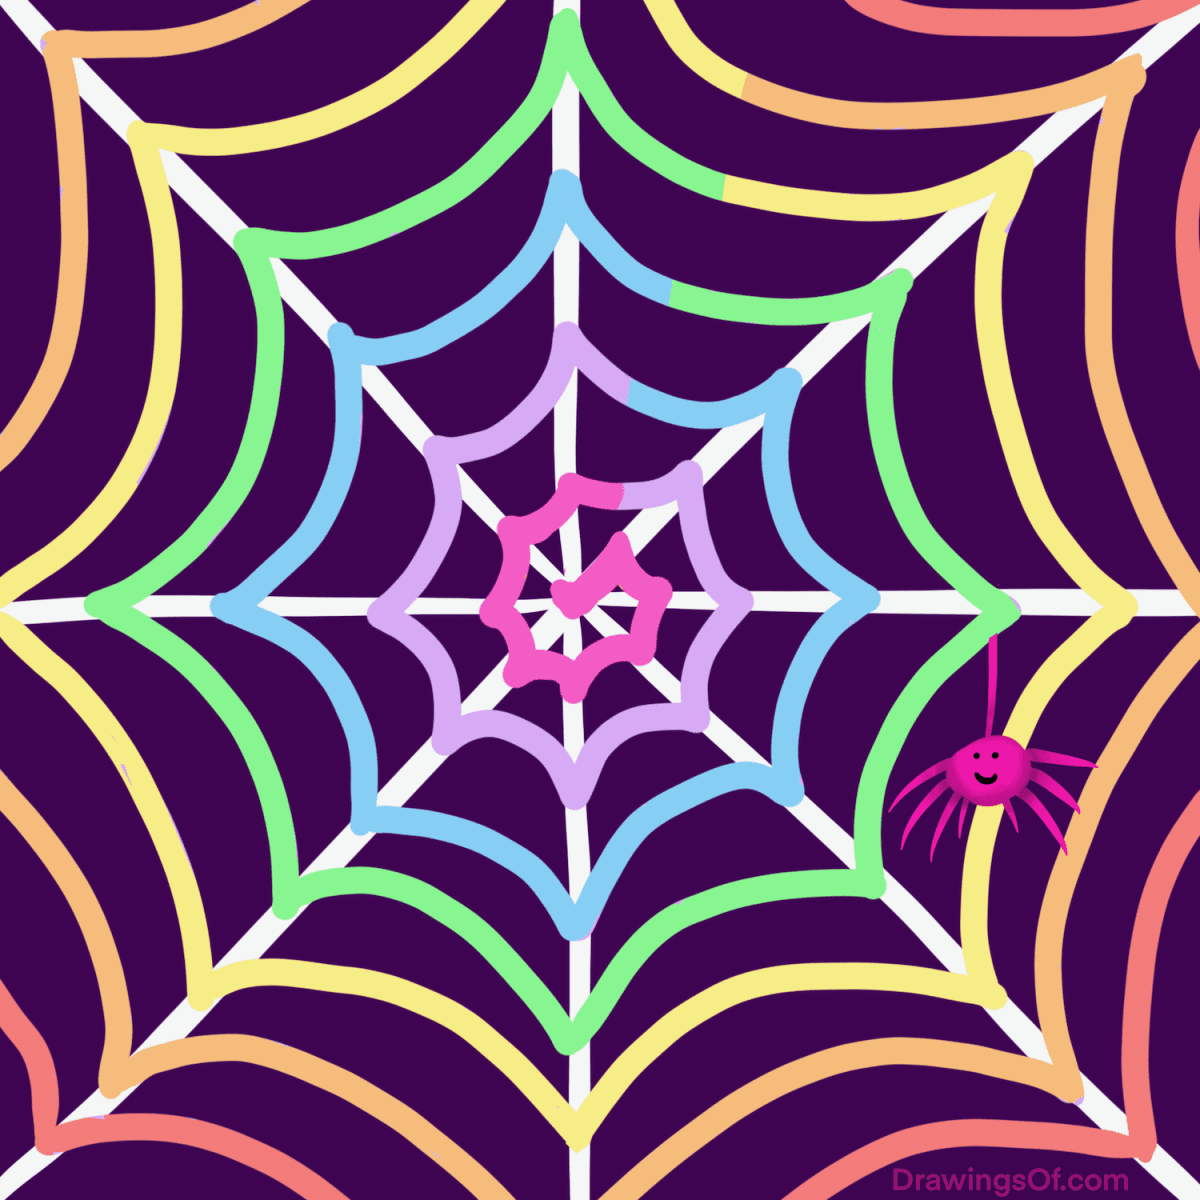 How to draw a spider web